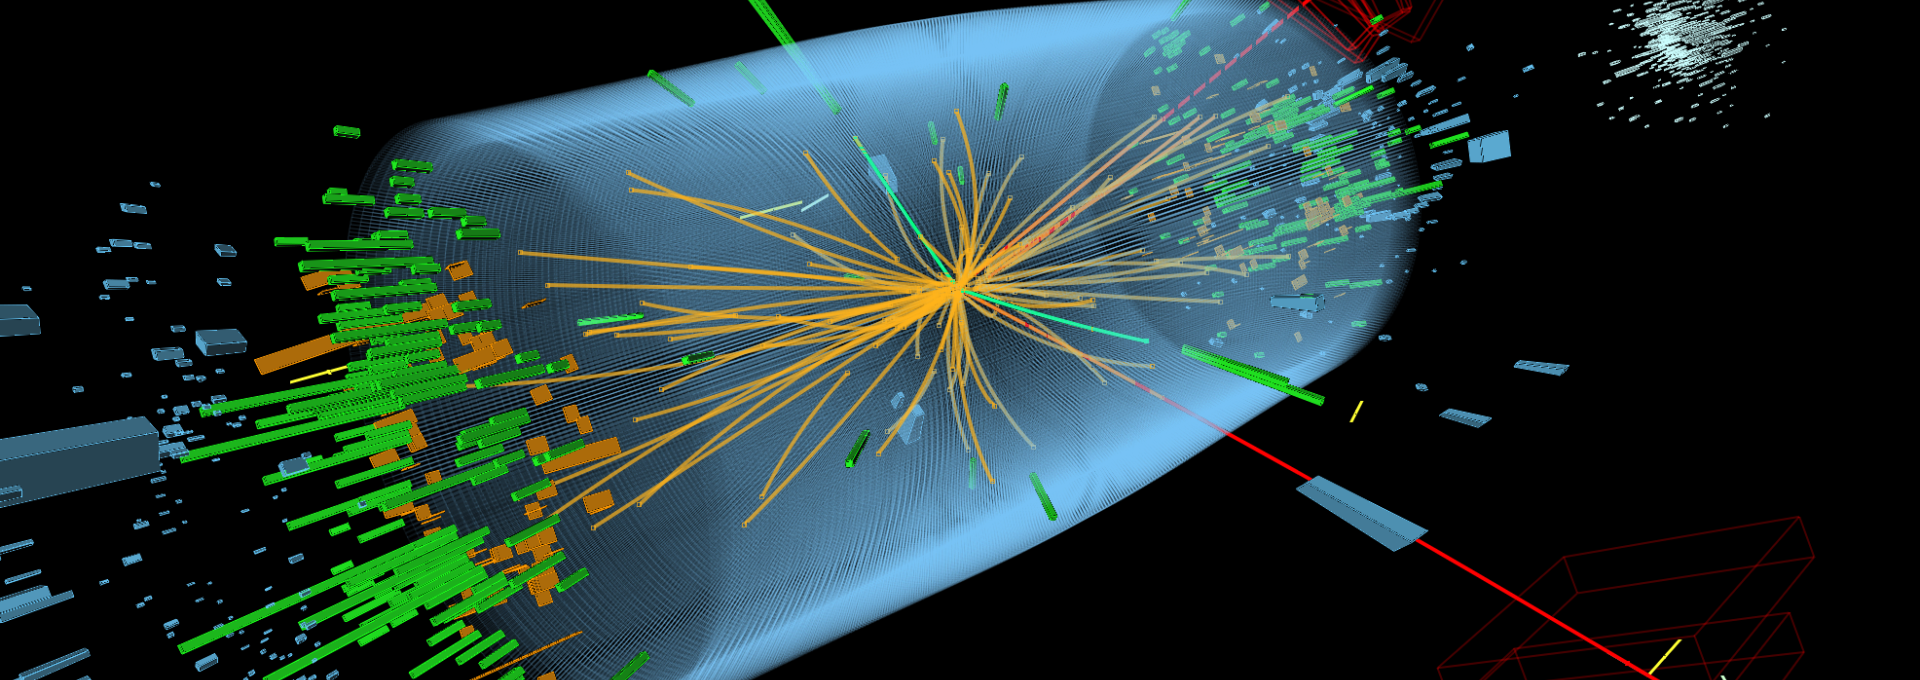 Ten years ago, the Higgs boson was discovered